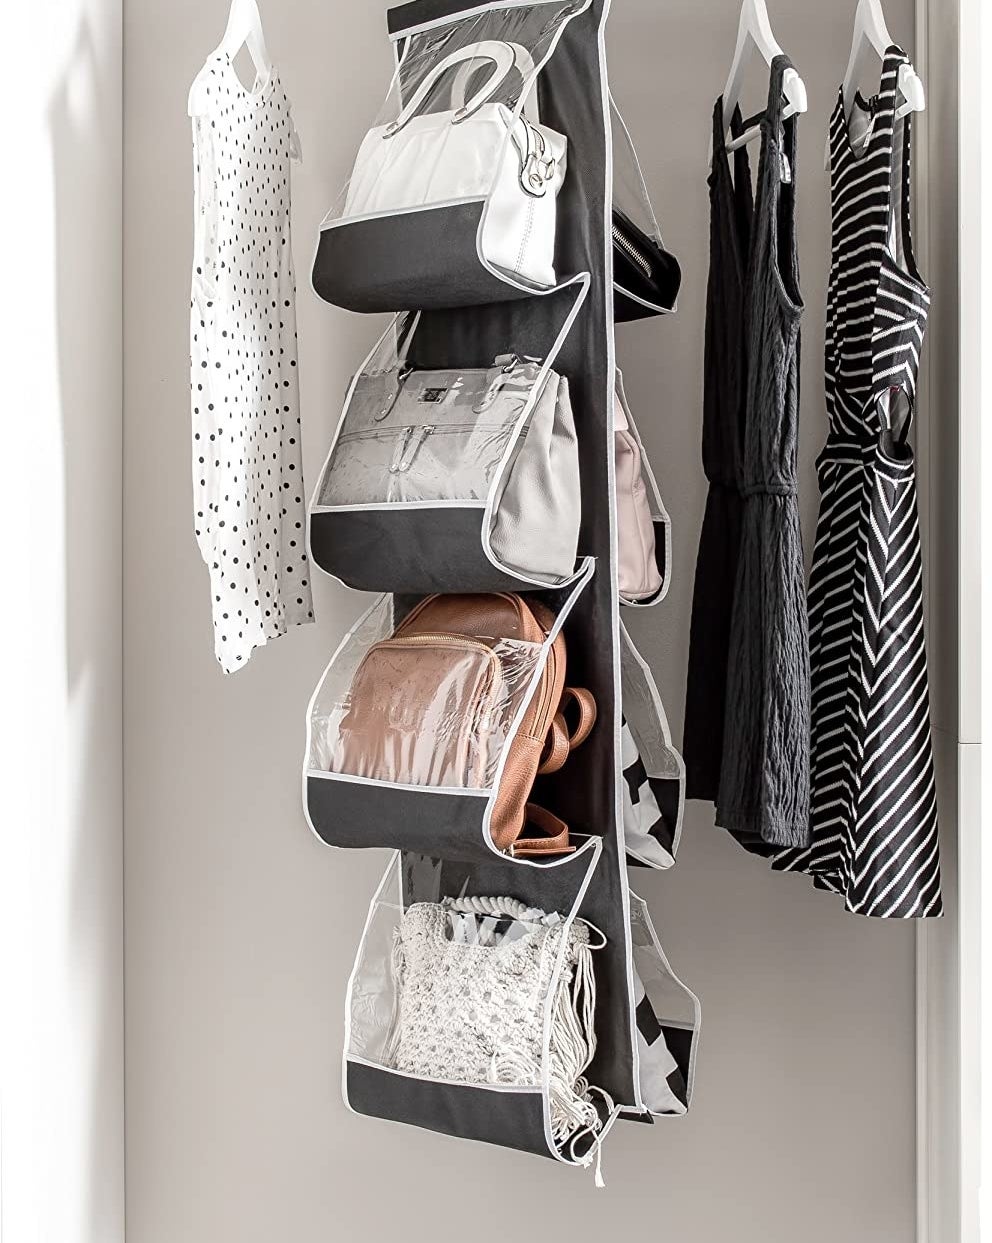 A long fabric handbag organizer hanging from a clothing rod It has four pockets on each side and are filled with large handbags